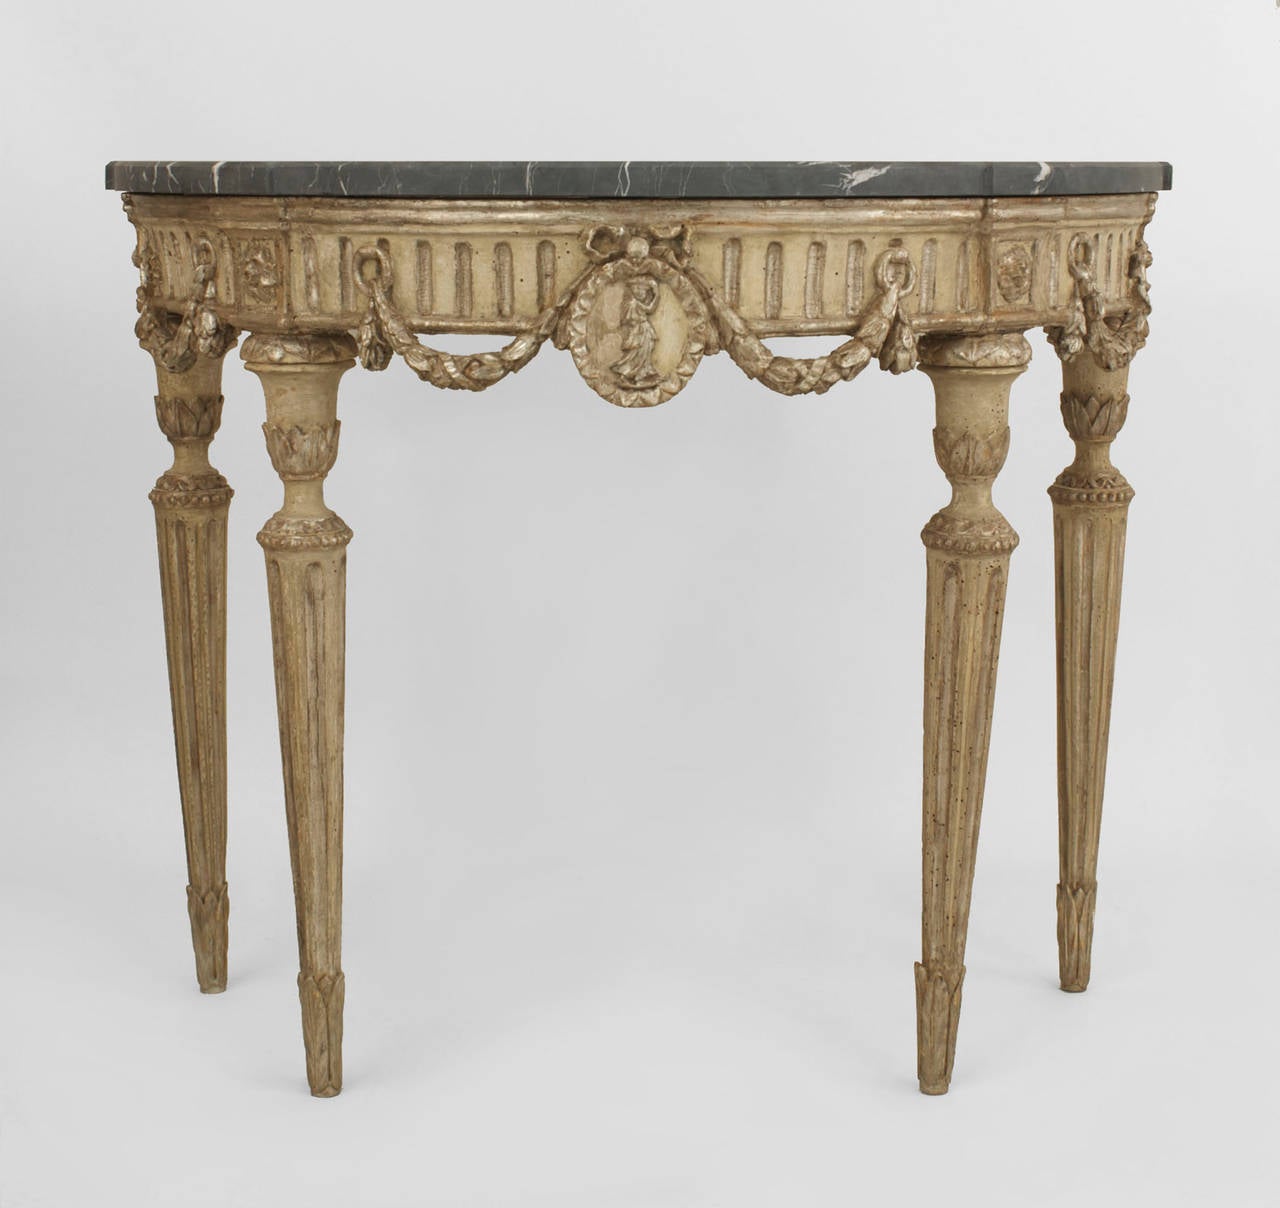 Pair of Italian neoclassic demilune silver-gilt and grey painted console tables
with a fluted apron having a central medallion flanked by garland swags over fluted legs supporting a marble top.